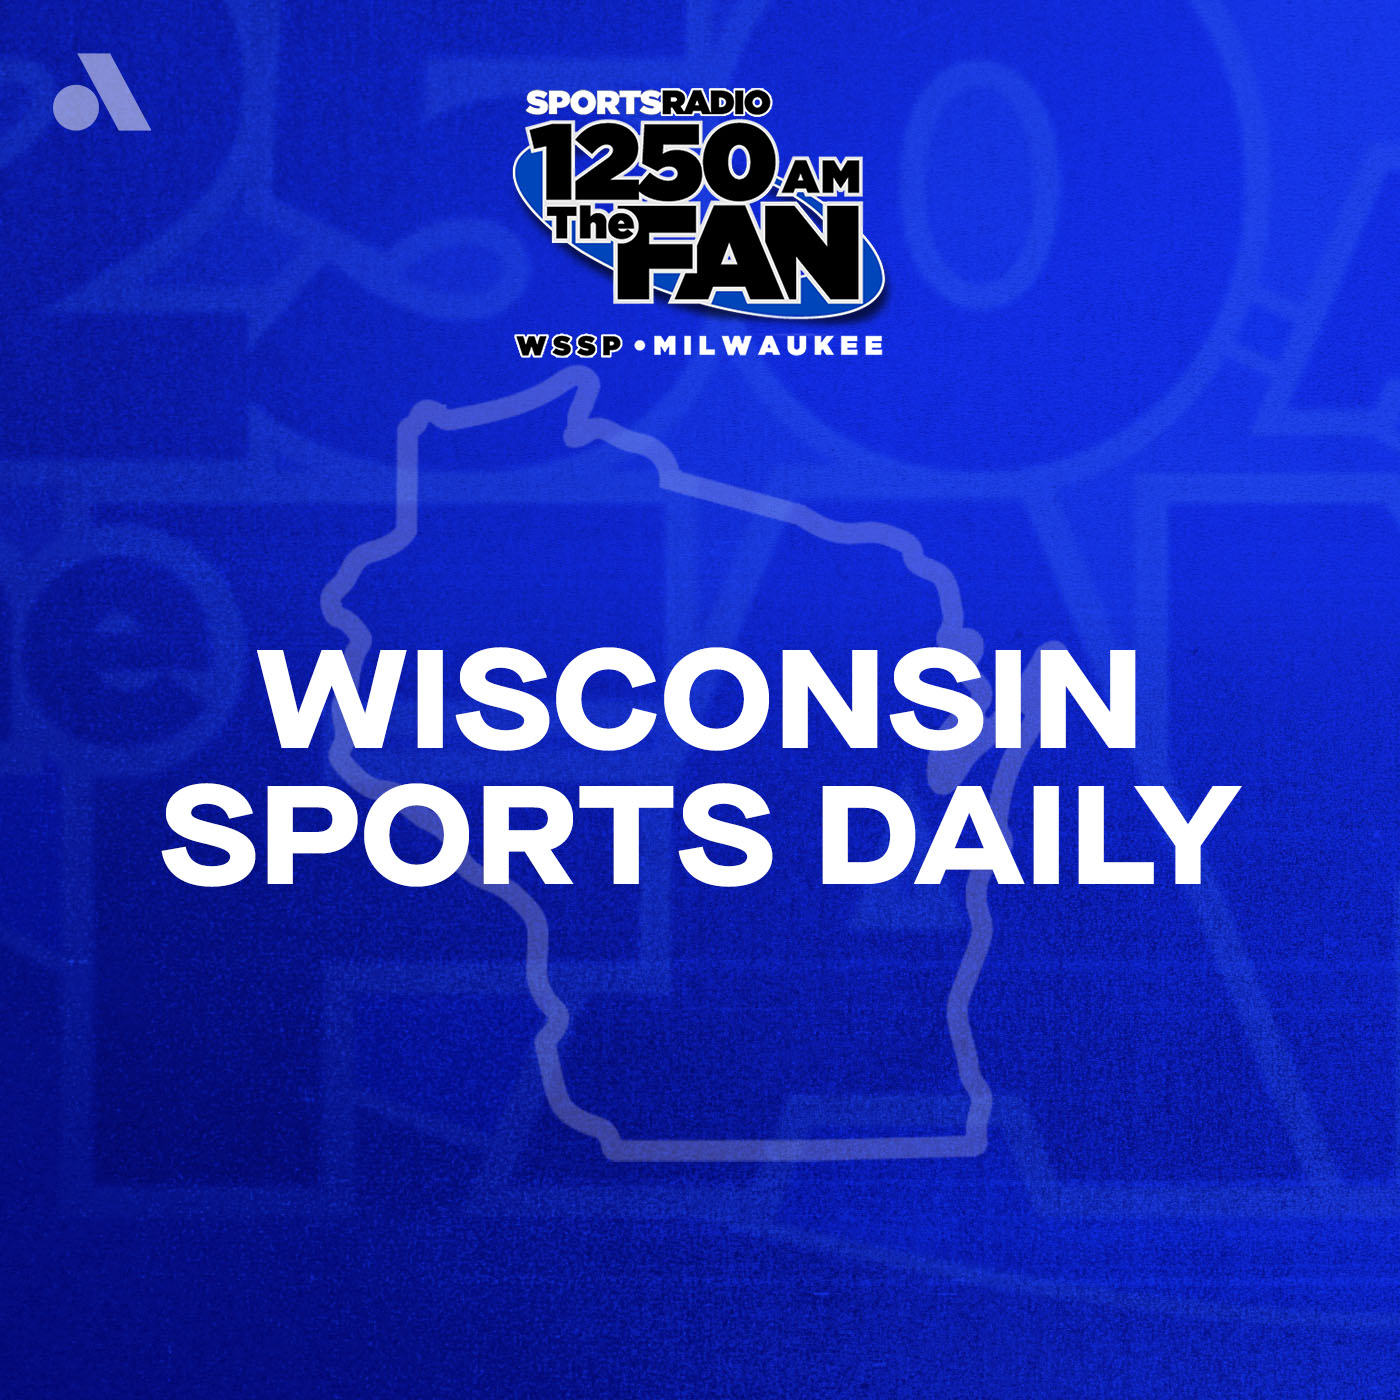 Wednesday, April 17th: Wisconsin Sports Daily Brewers Recap